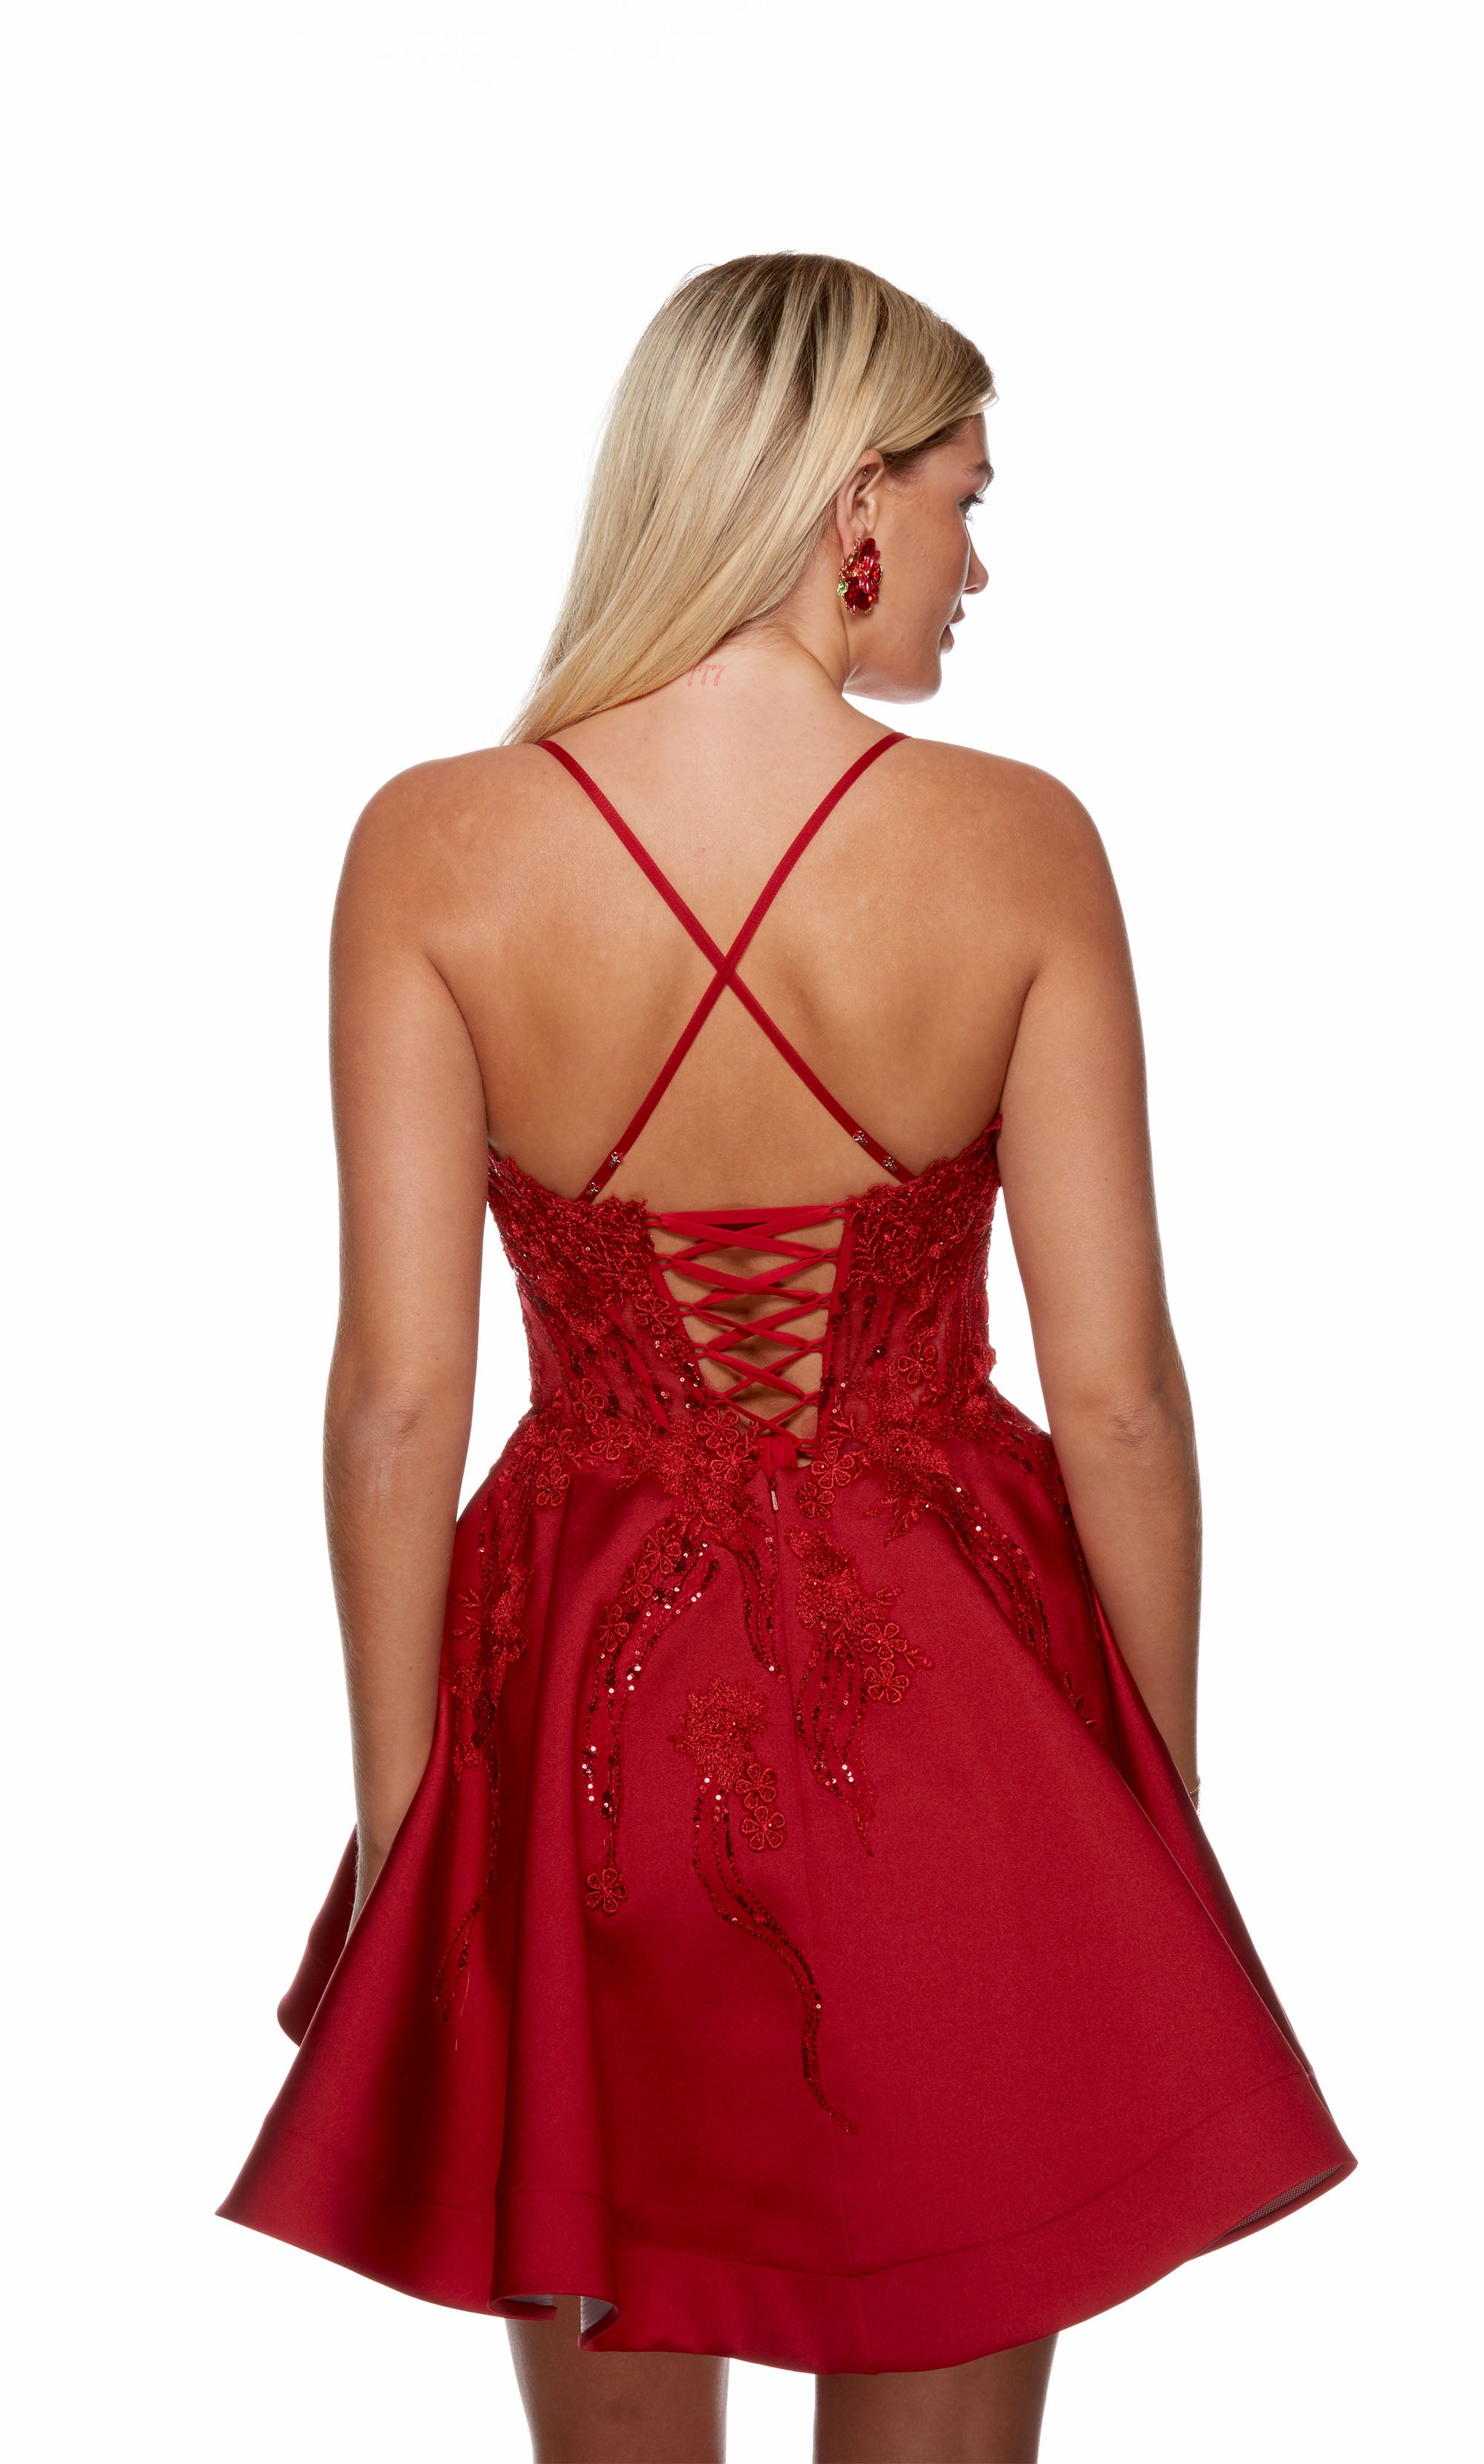 A red corset dress with a sheer lace bodice, a flared skirt, and a lace-up back, perfect for parties or dances. This dress is from our latest collection of gorgeous designer dresses by ALYCE Paris.